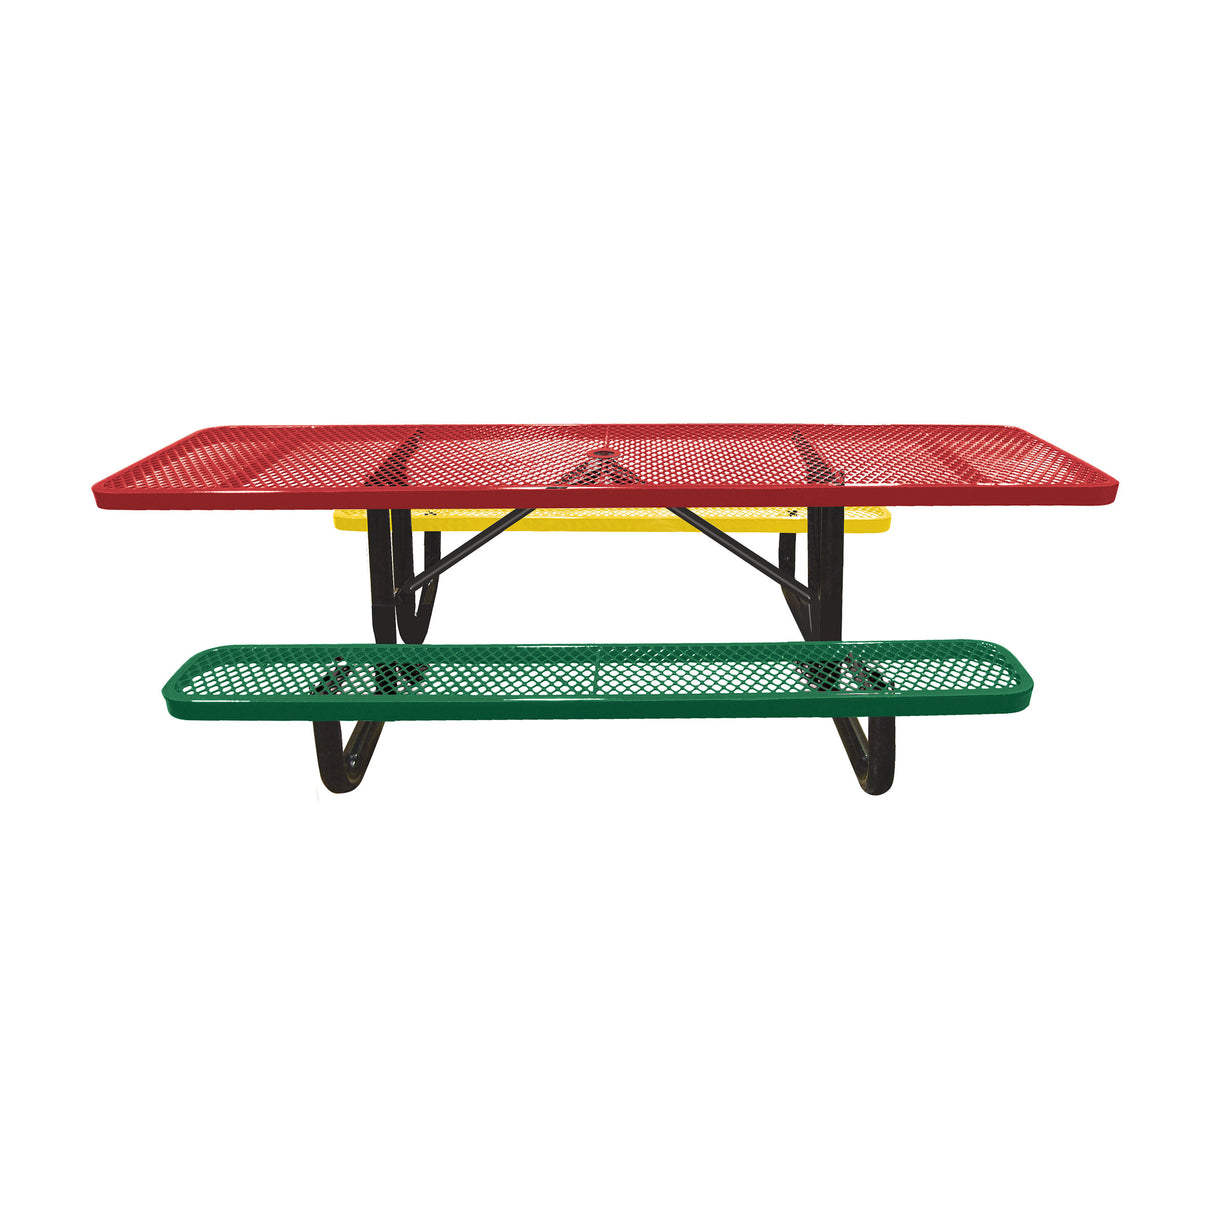 Perforated Children's Picnic Table